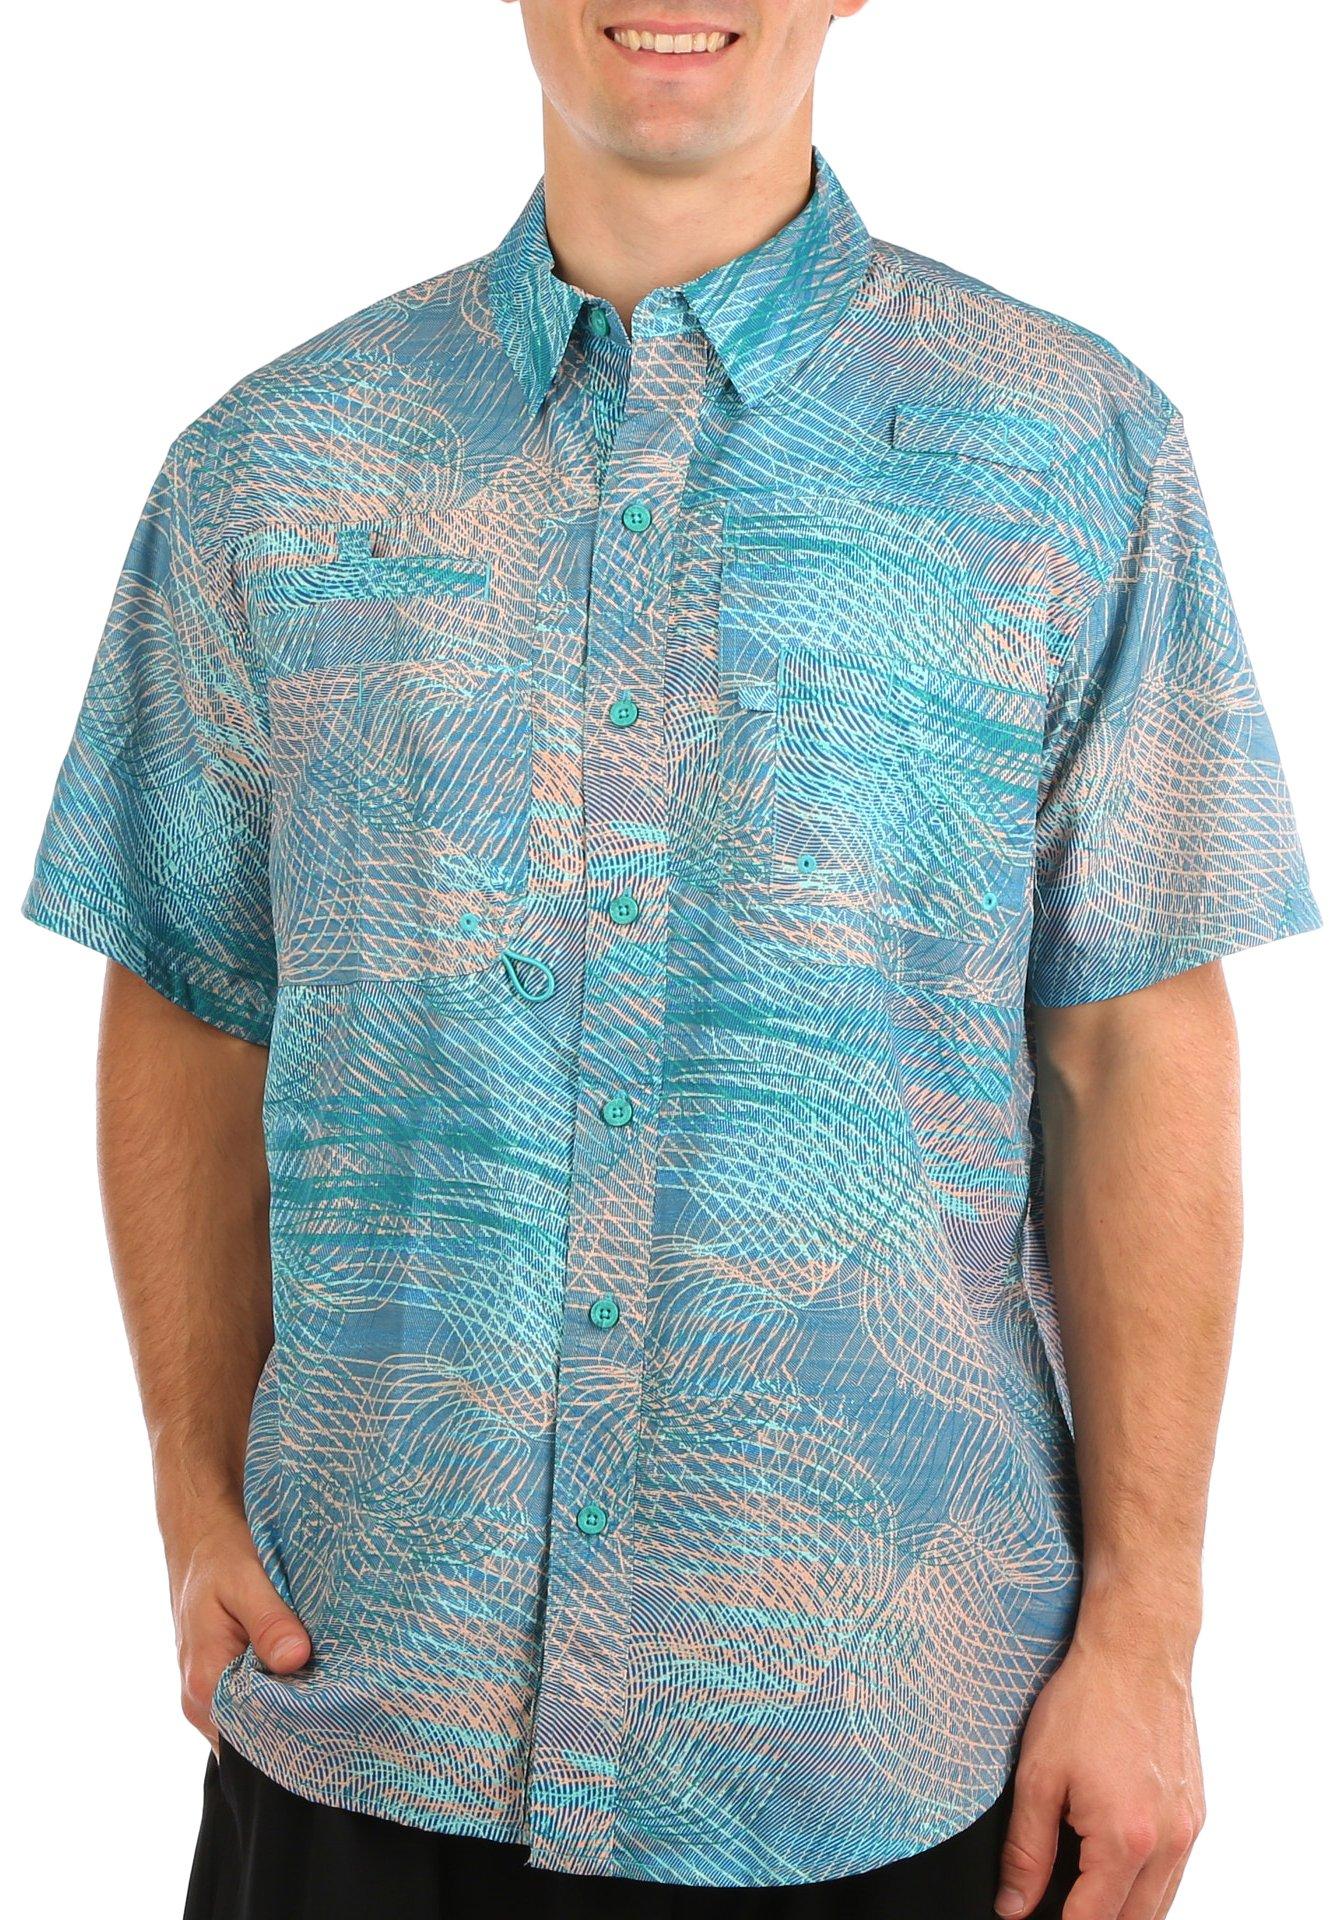  Reel Legends Mens Haw/Distress Print Saltwater Shirt Small  Apricot : Clothing, Shoes & Jewelry